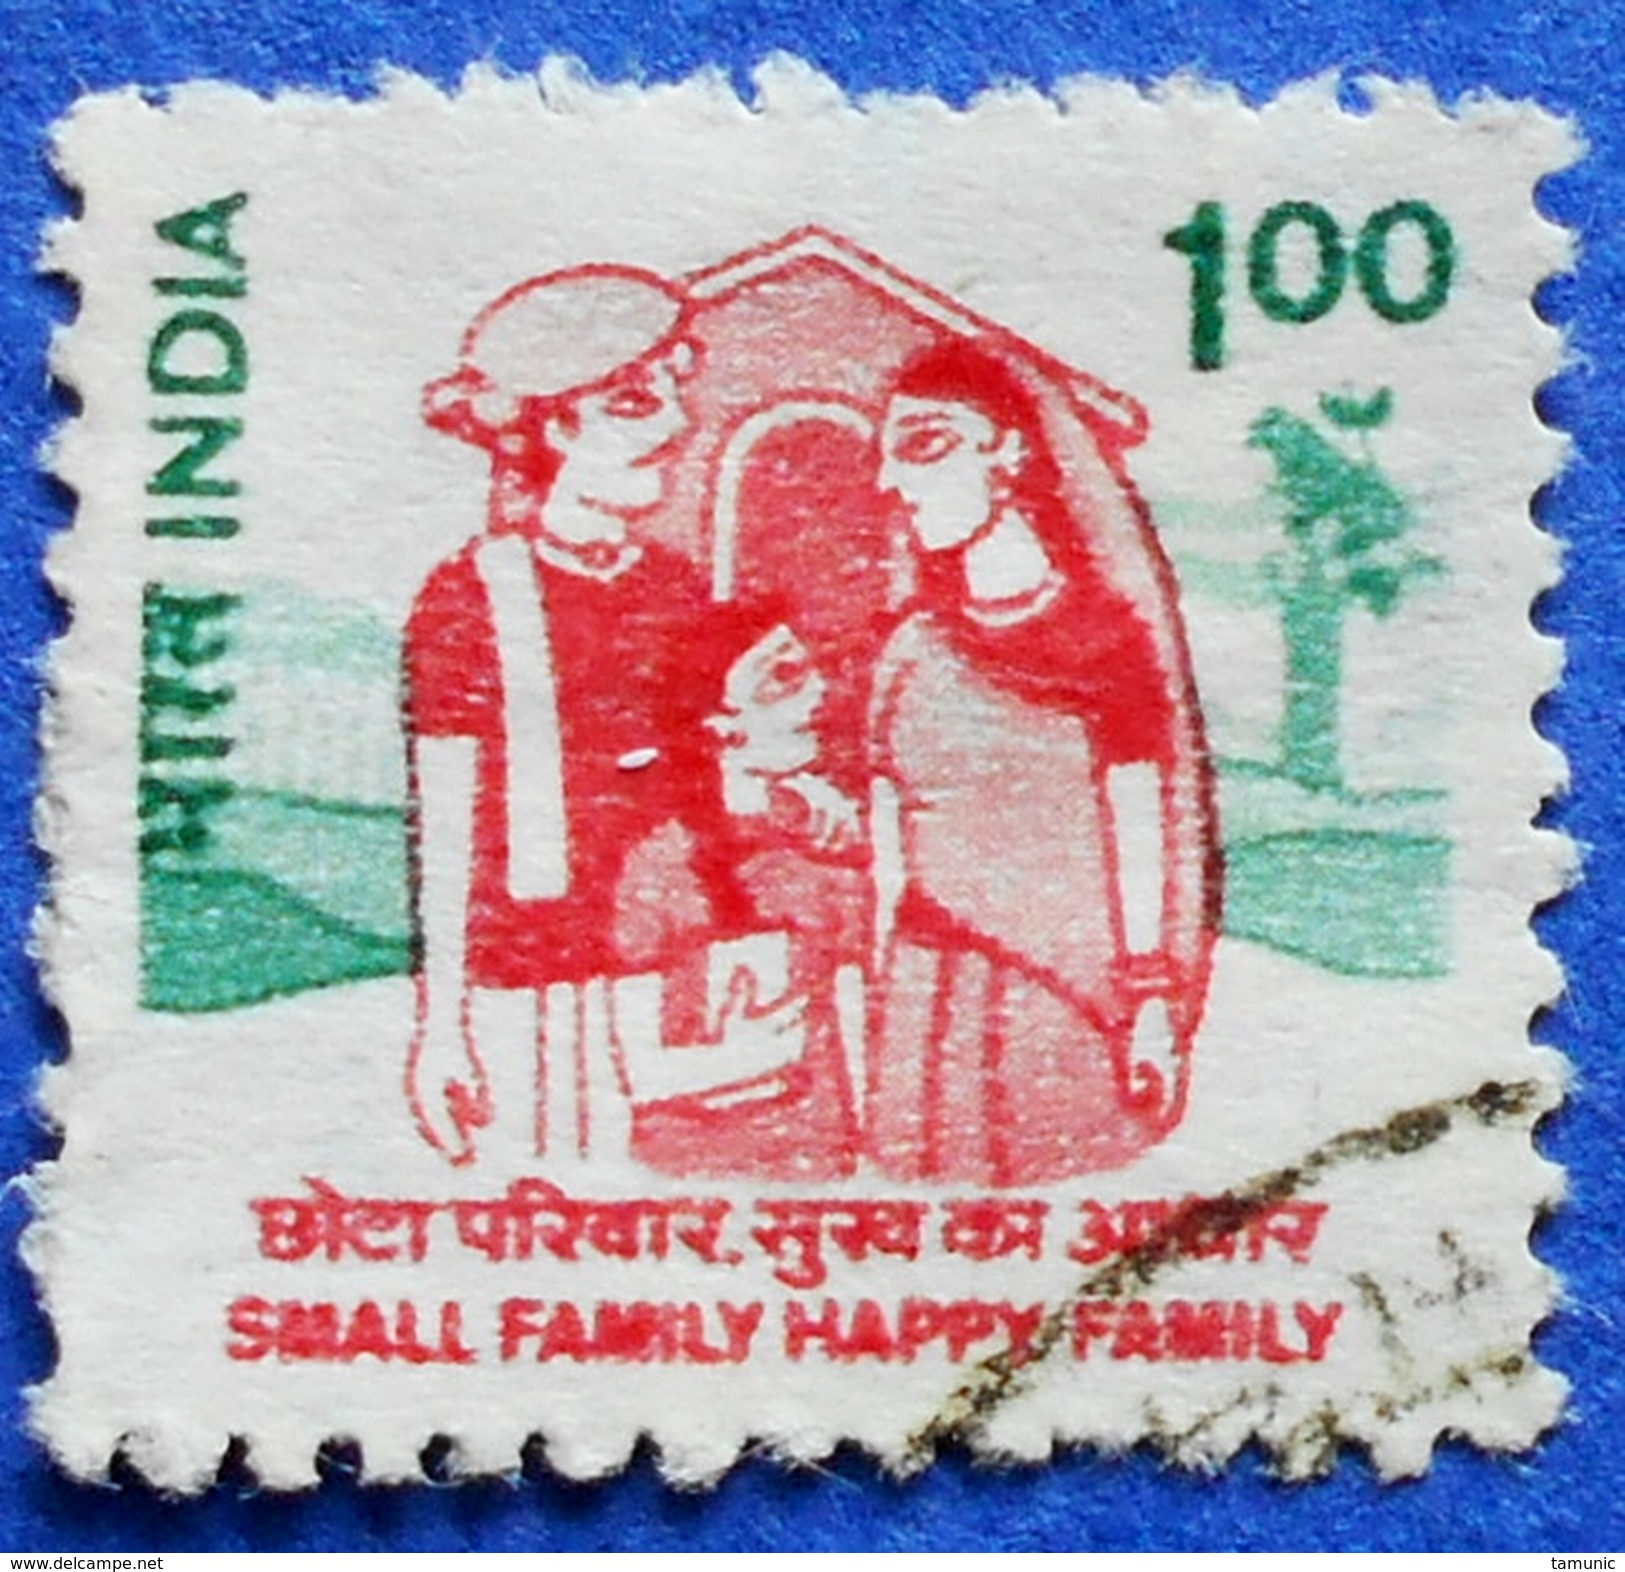 INDIA 1,00 1994 FAMILY PLANNING SMALL FAMILY HAPPY FAMILY - USED - Oblitérés